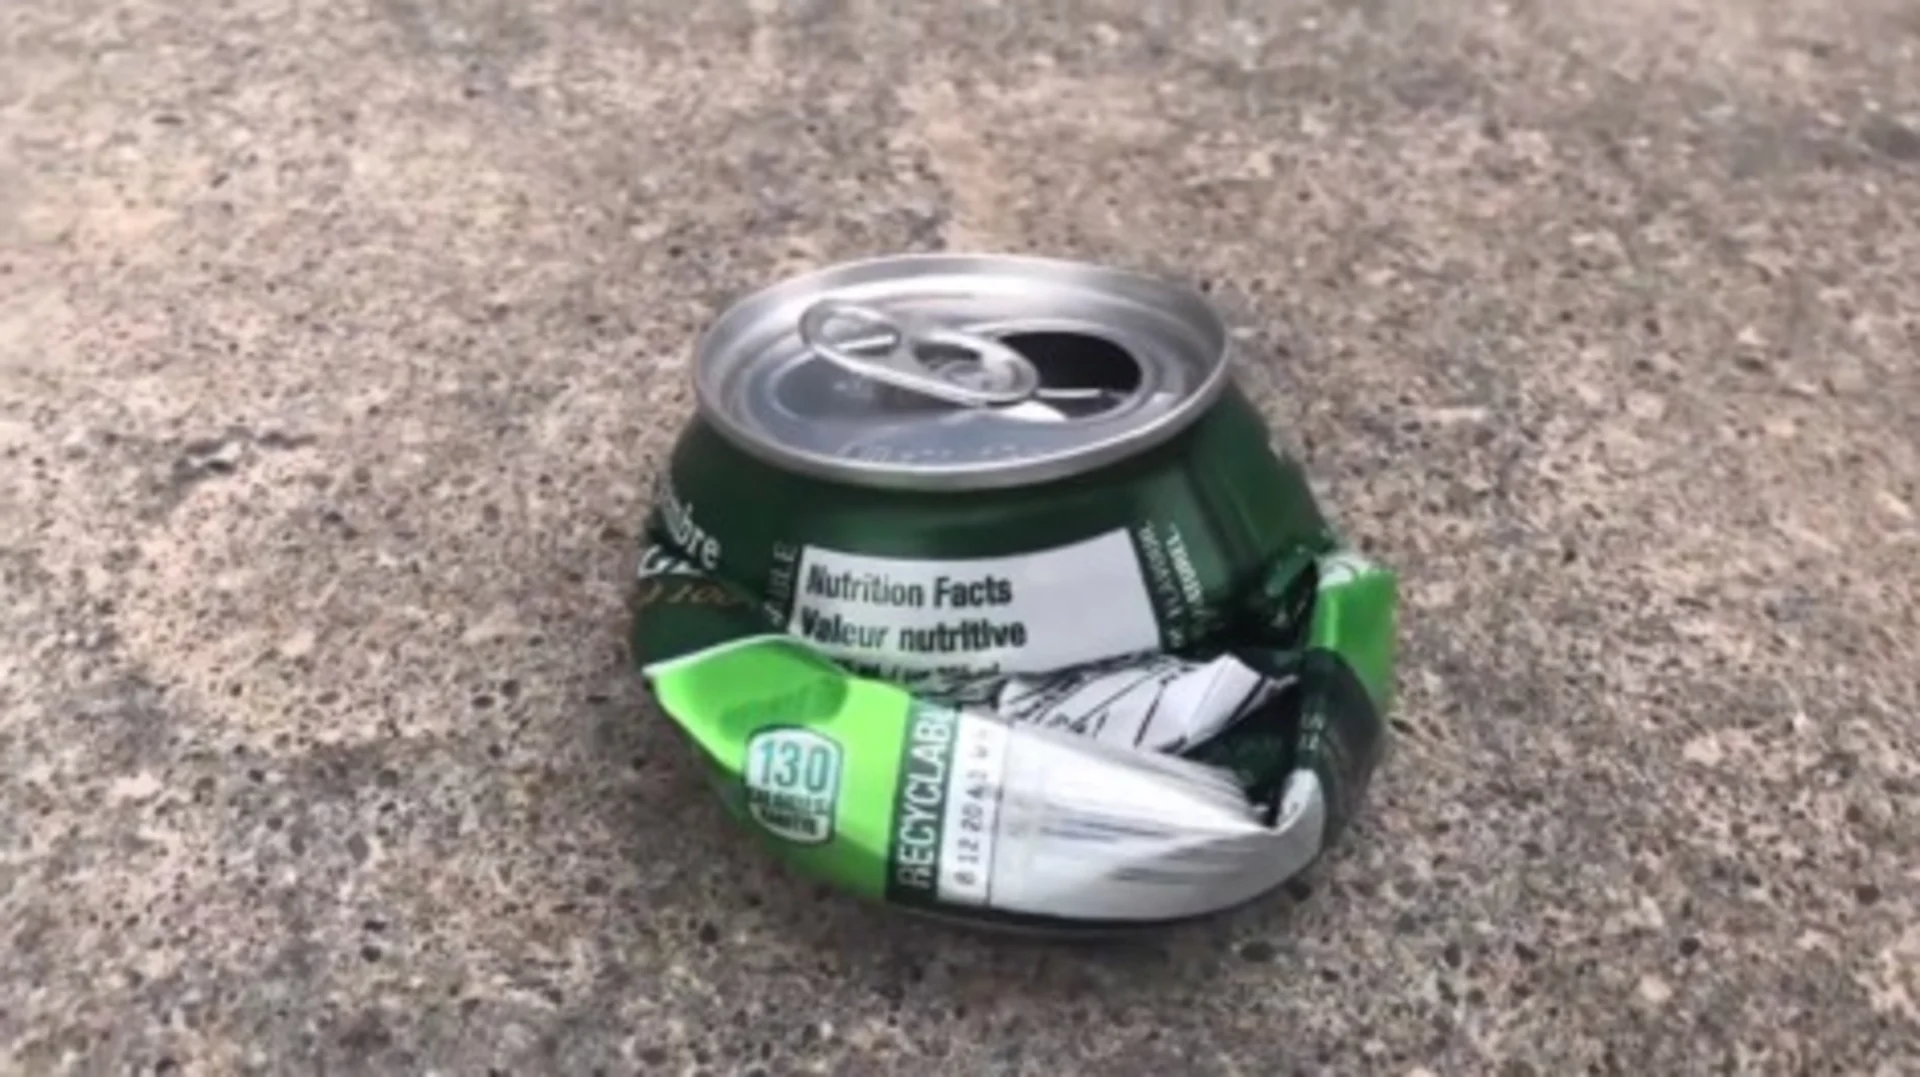 Why you shouldn't crush aluminum cans